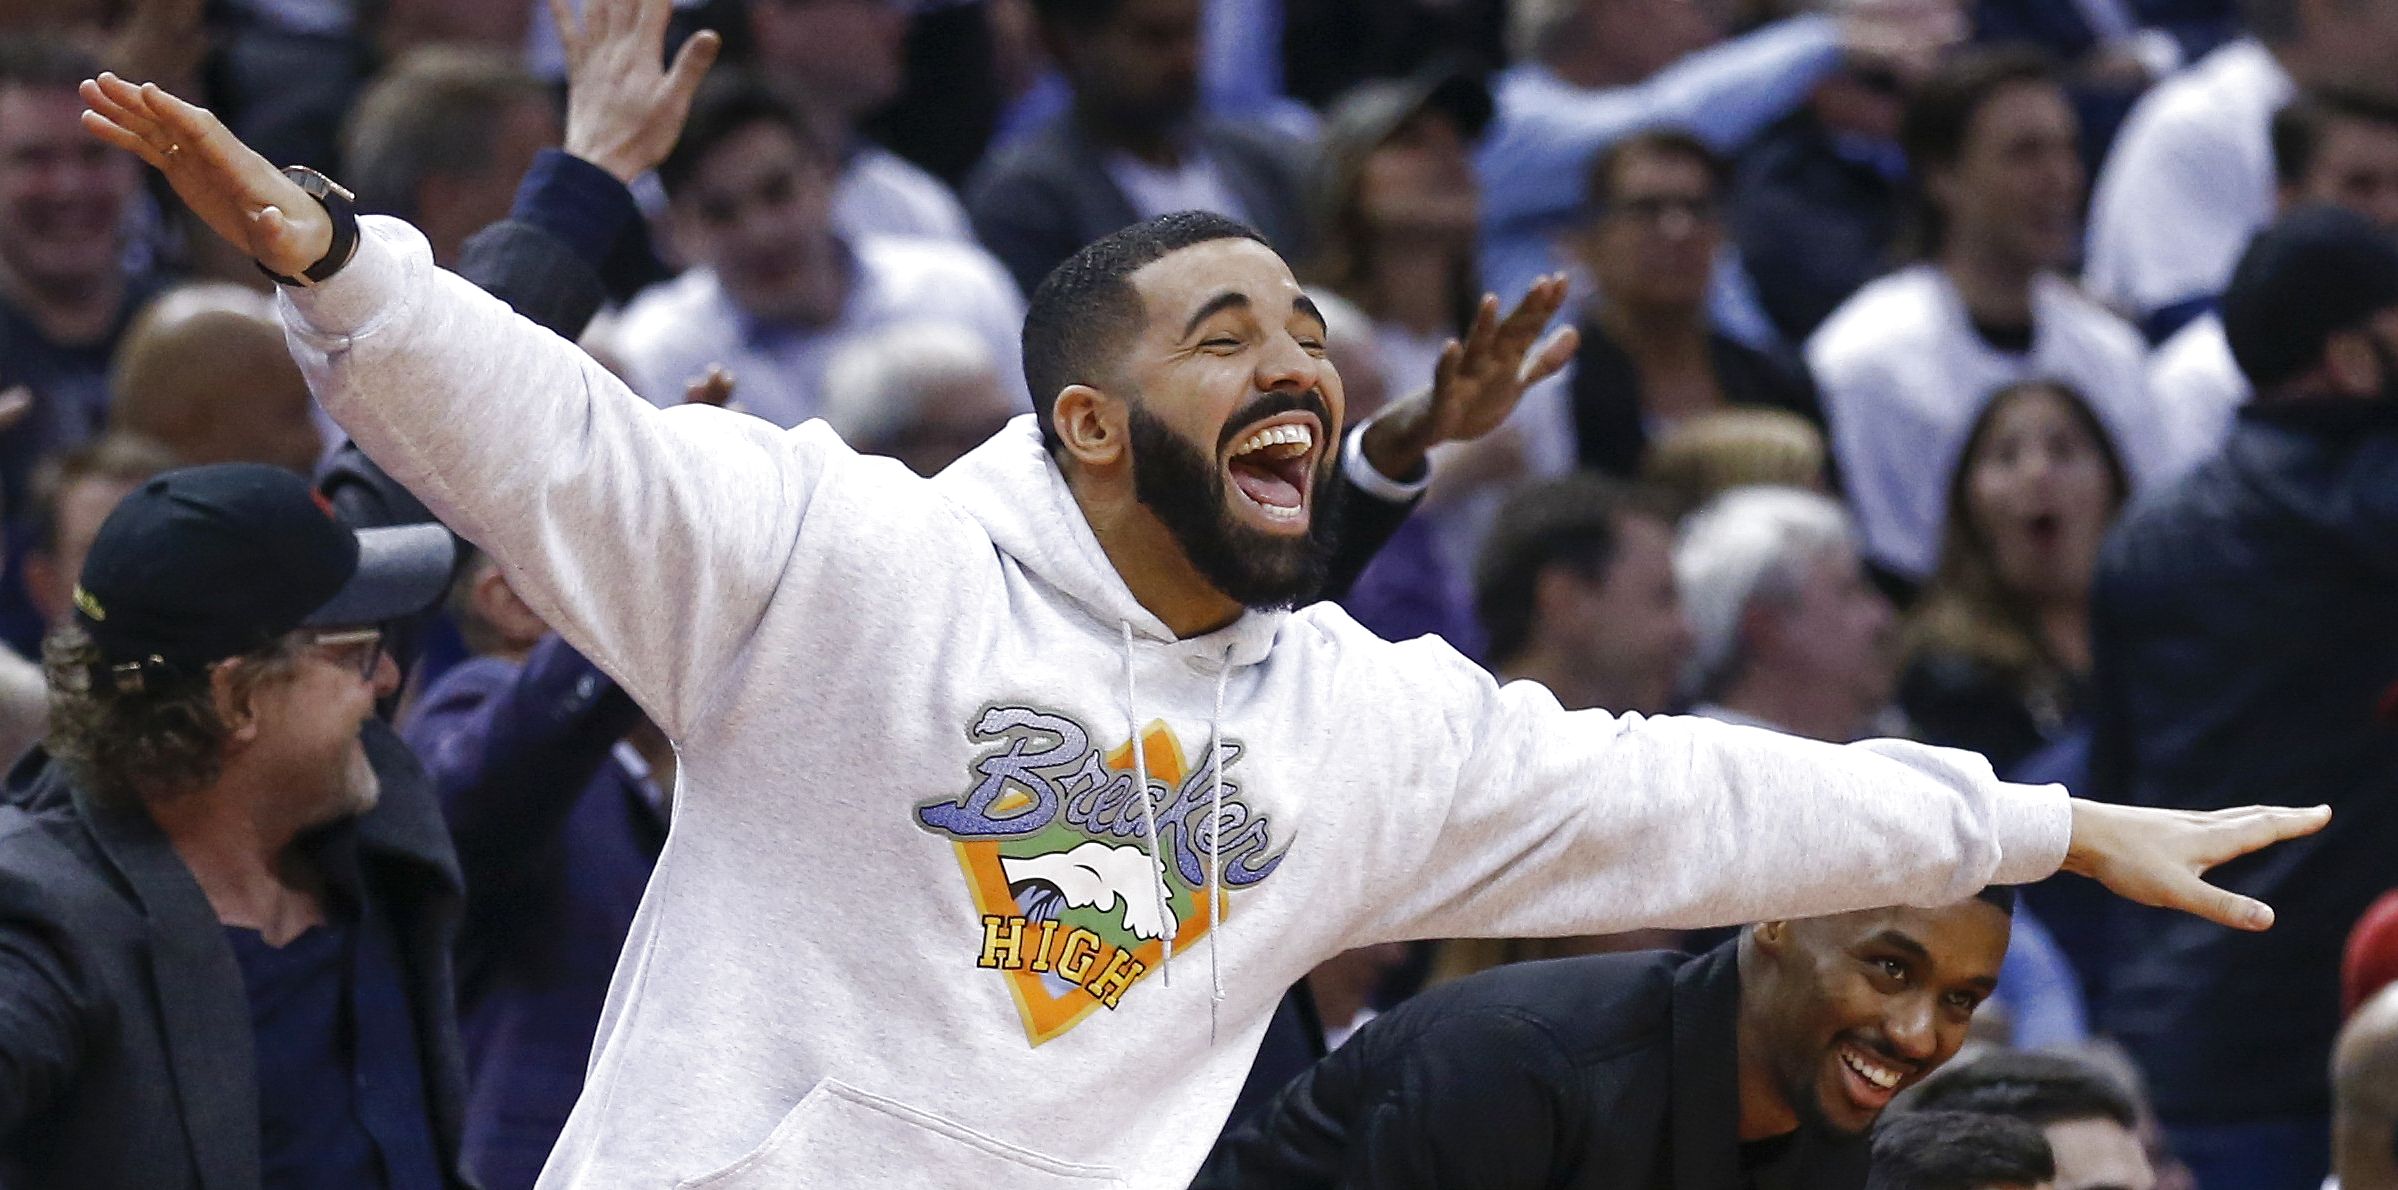 Michael Rubin jokes about 'hatred' for Drake using cruse against 76ers